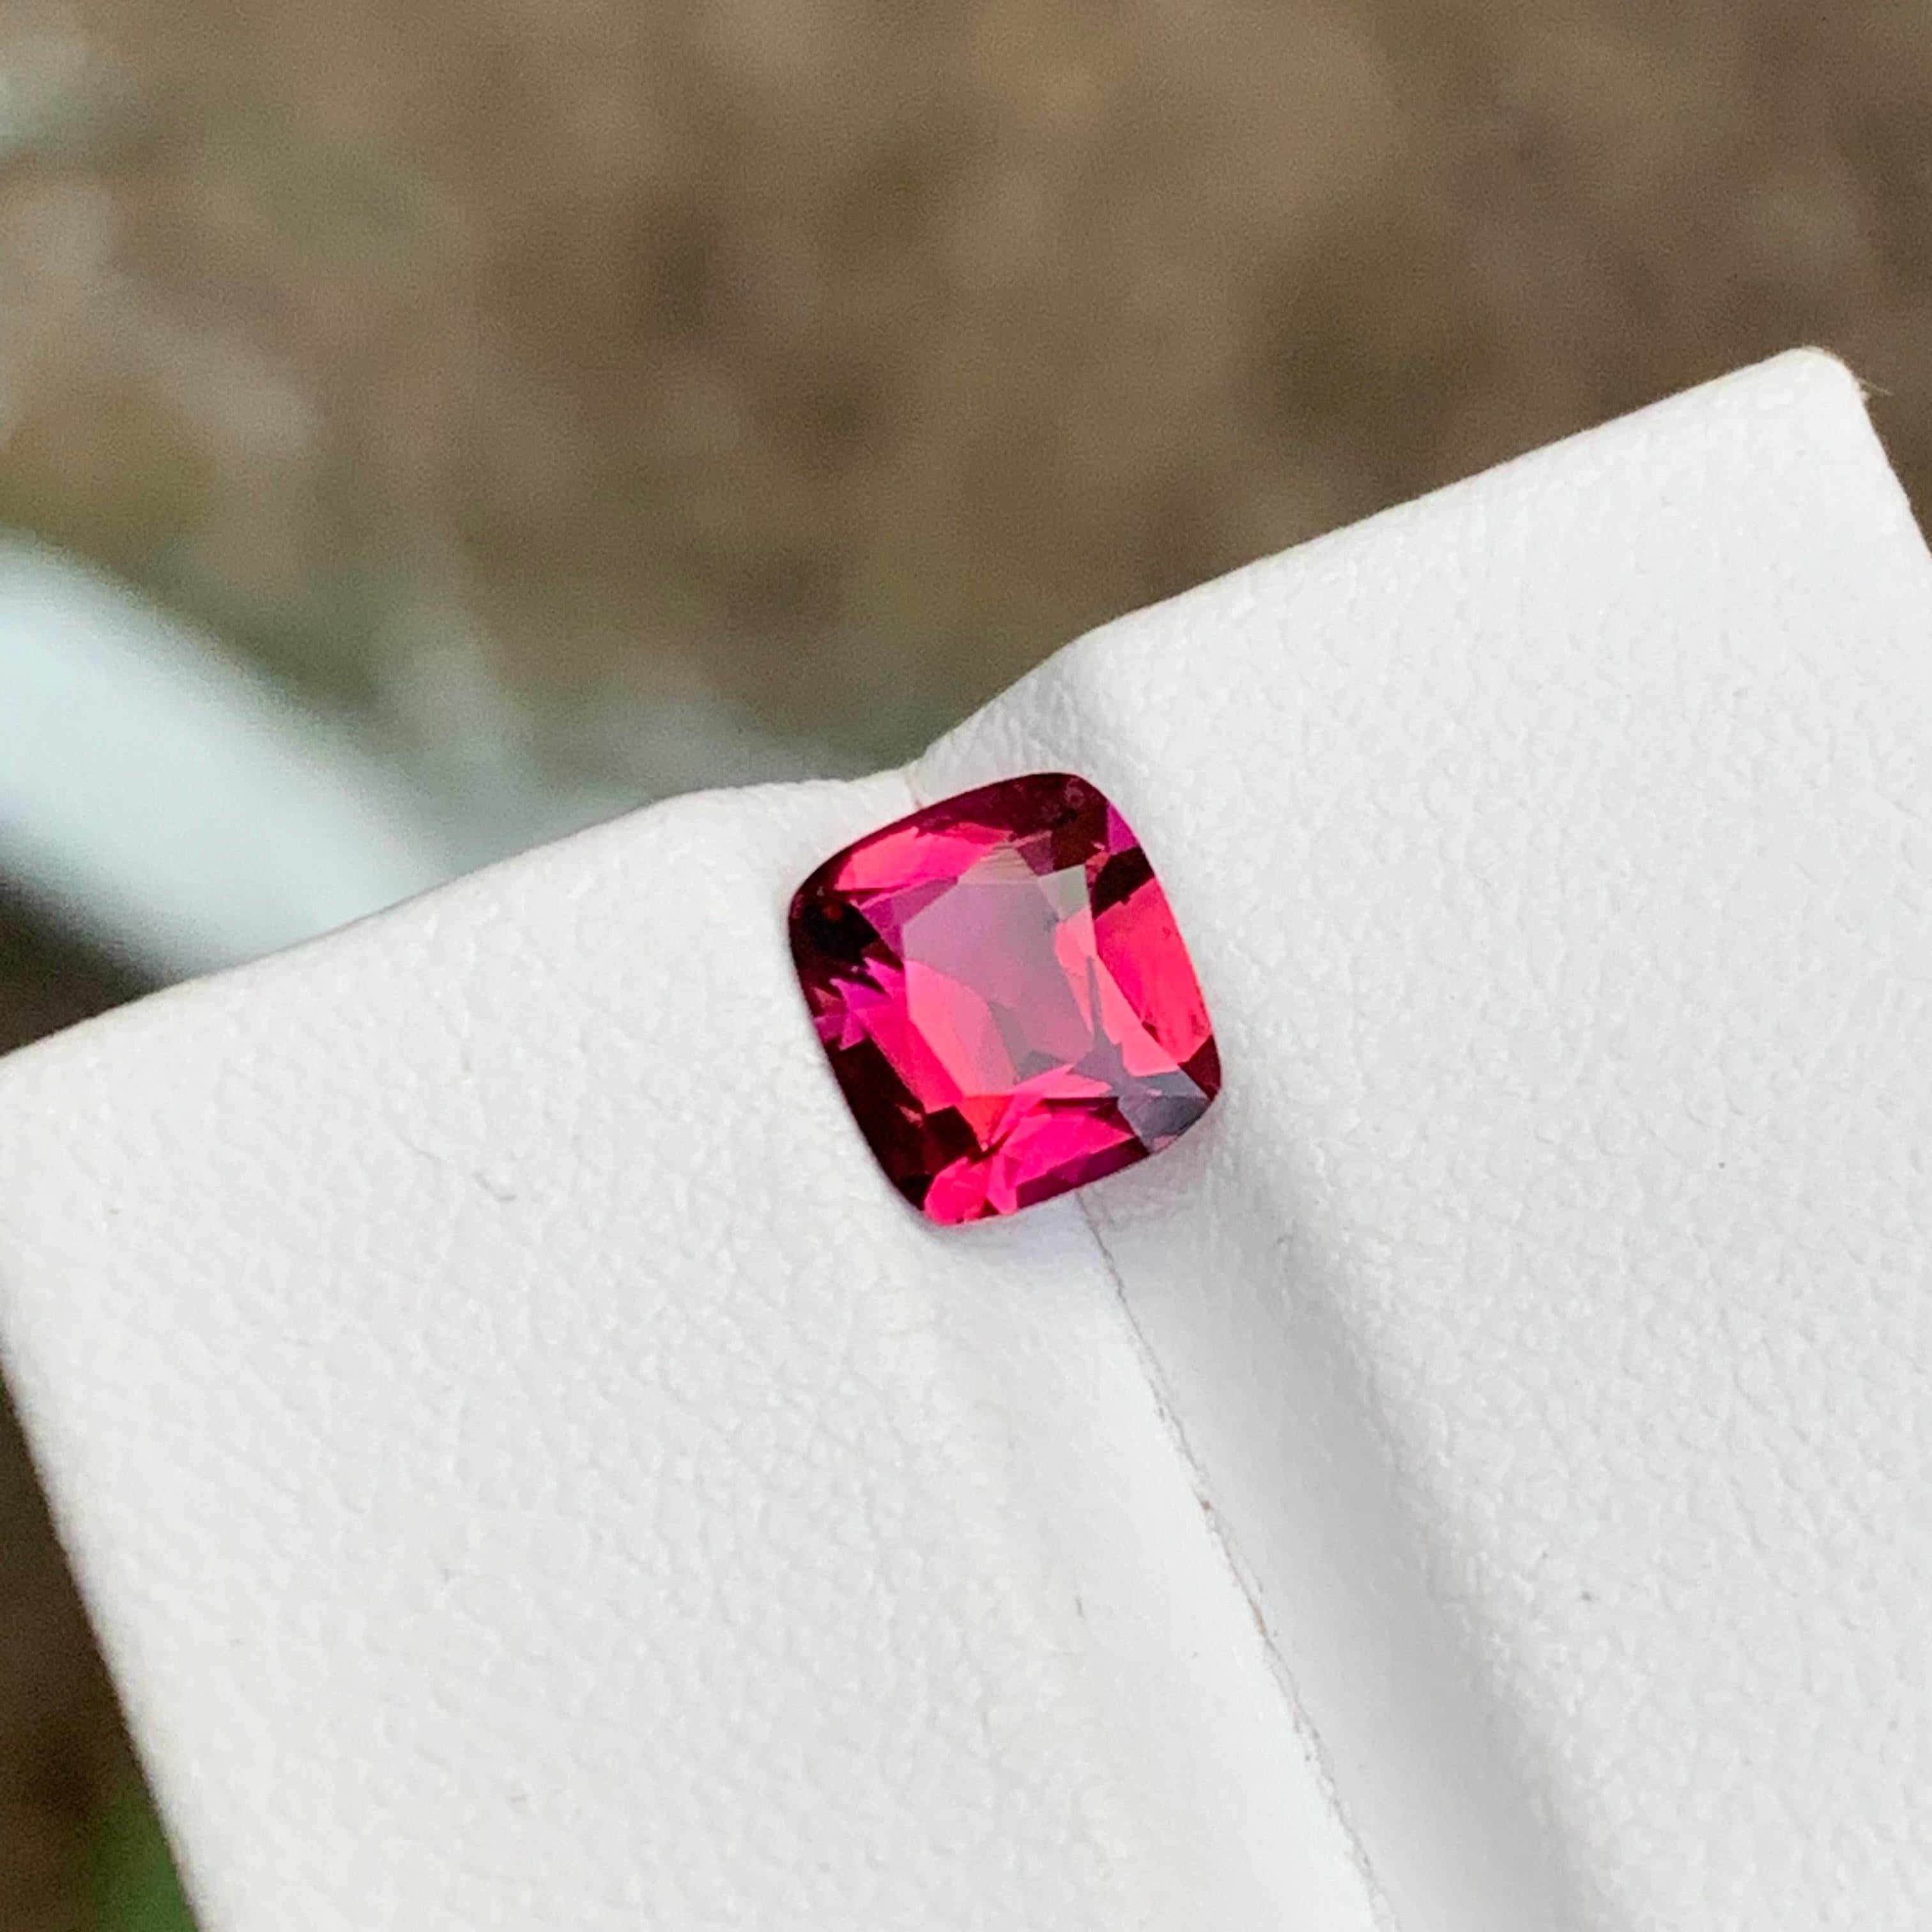 Contemporary Rare Reddish Pink Rubellite Tourmaline Gemstone, 1.20 Ct Cushion Cut for Ring For Sale